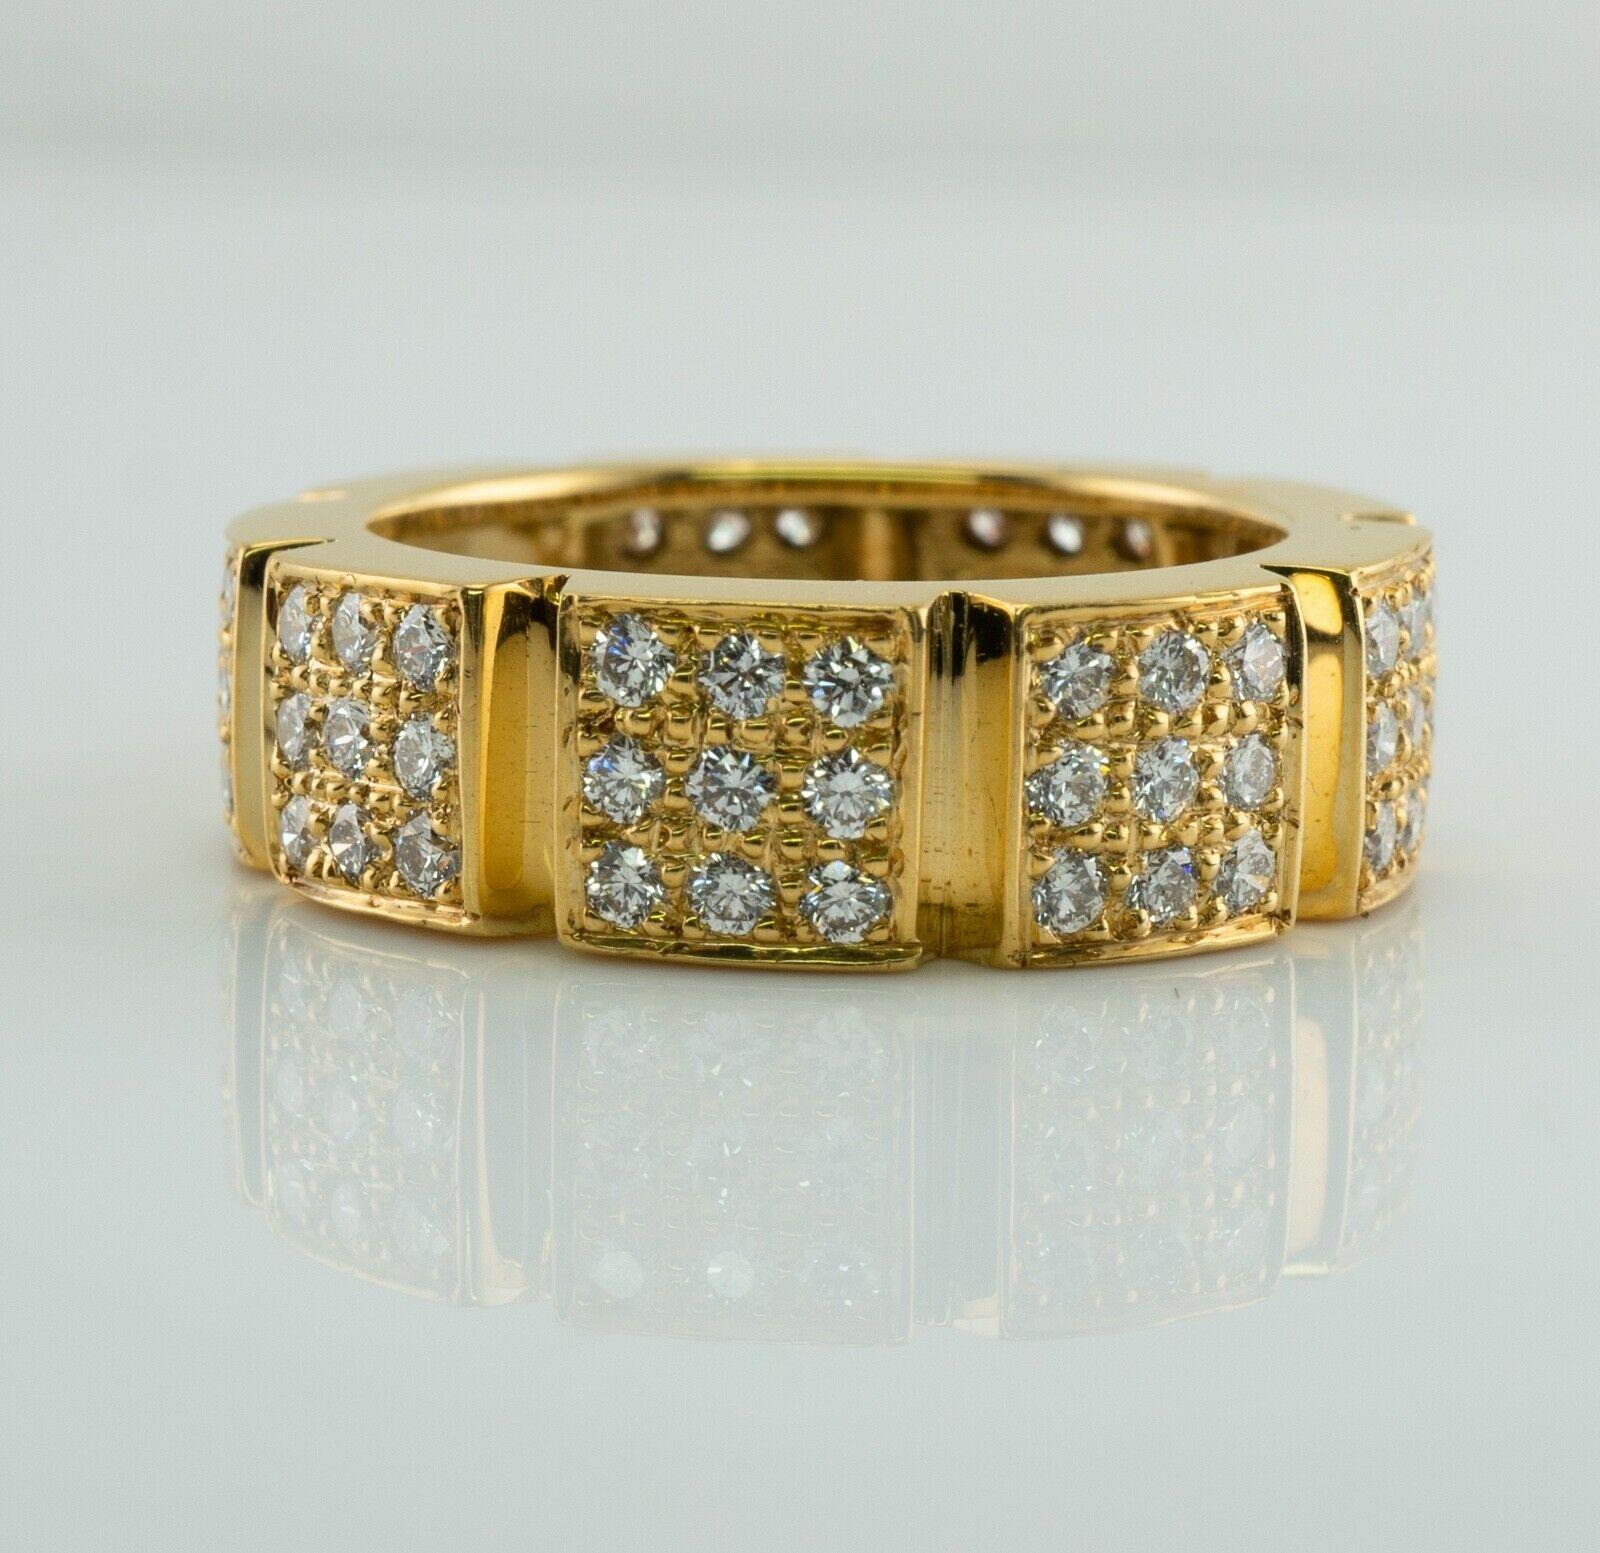 This very unusual estate sculptured band is finely crafted in solid 18K Yellow Gold. 
Each diamond block has 9 diamonds are VS2 clarity and G color totaling 1.44 carat for the ring.
The width of the band is 6mm and 2mm thick.
Size 6 and